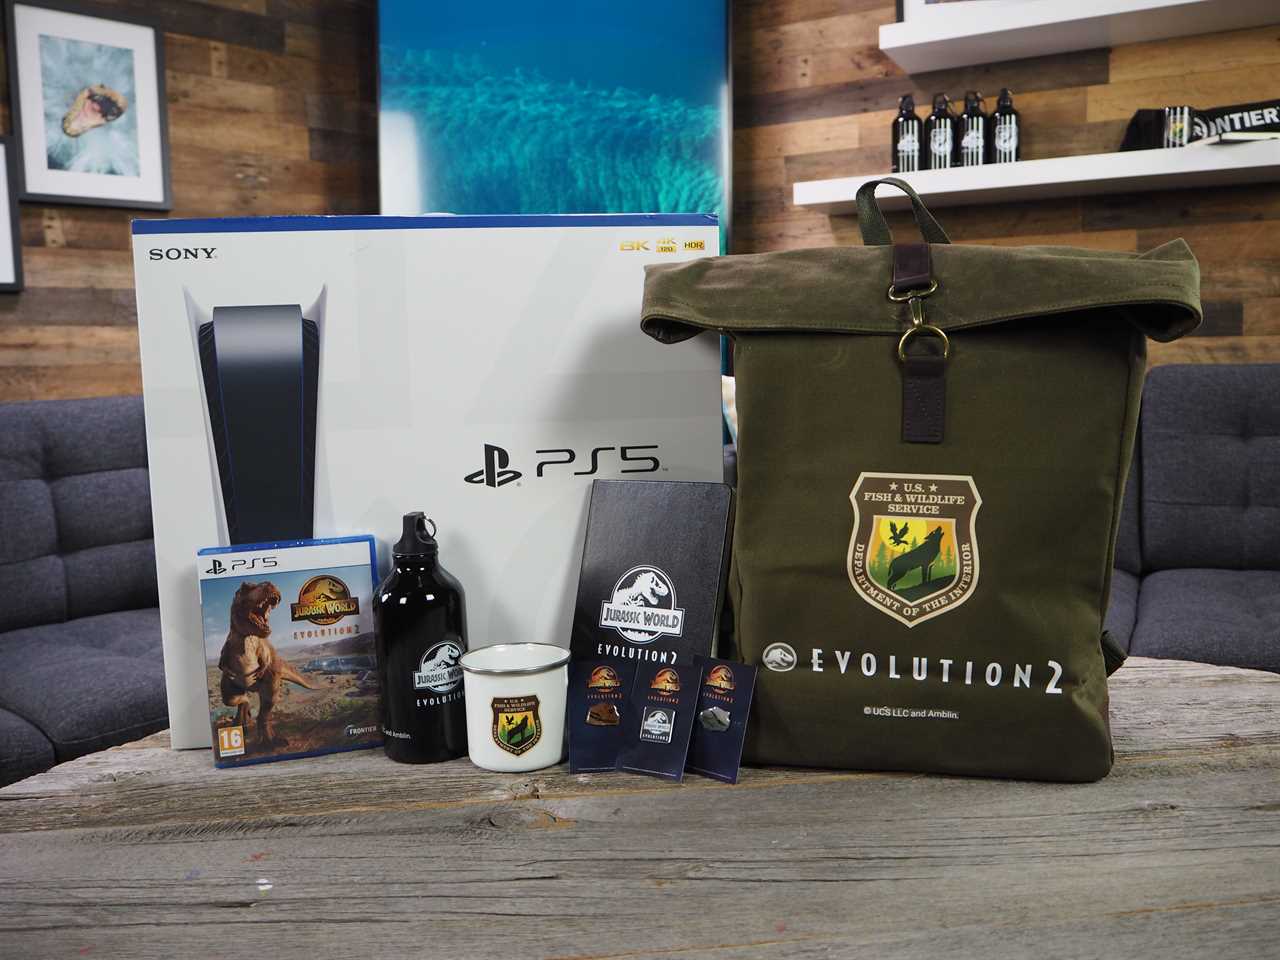 Win a Sony PS5, Jurassic World Evolution 2 and a ton of themed merch – in time for Christmas!